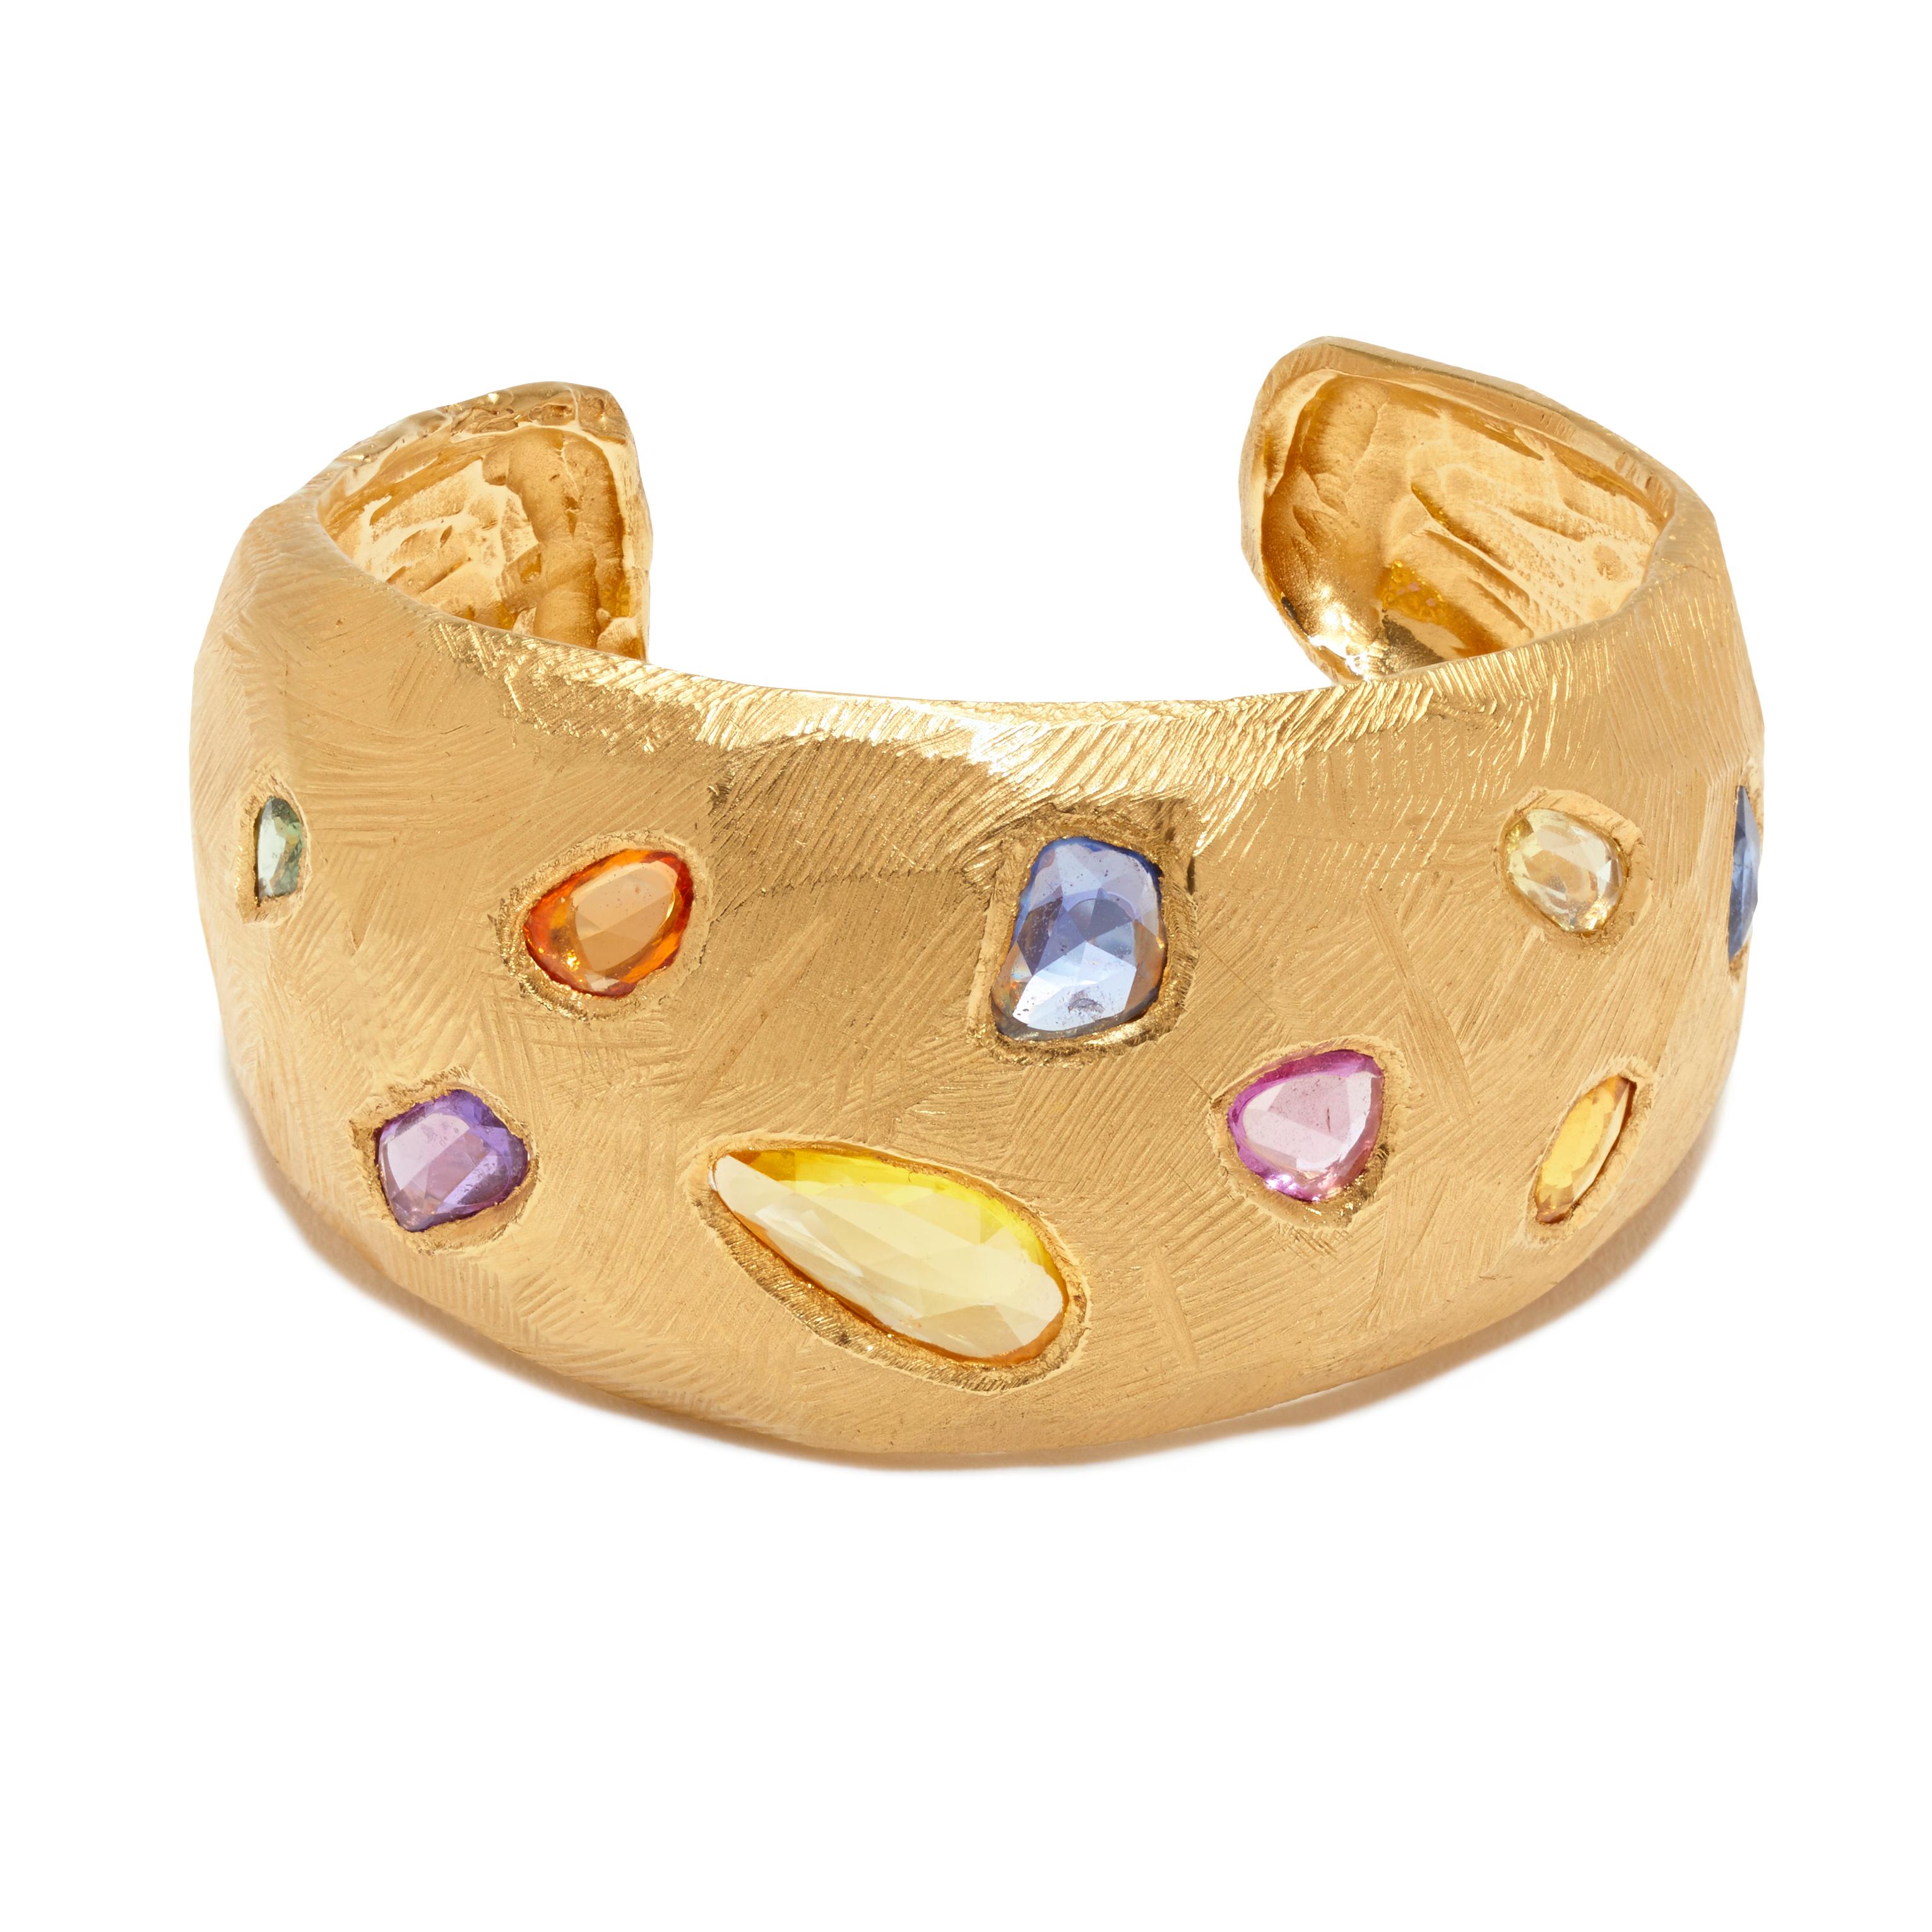 18 Karat Gold Cuff Bracelet with over 10 Carat of Sapphires For Sale 2